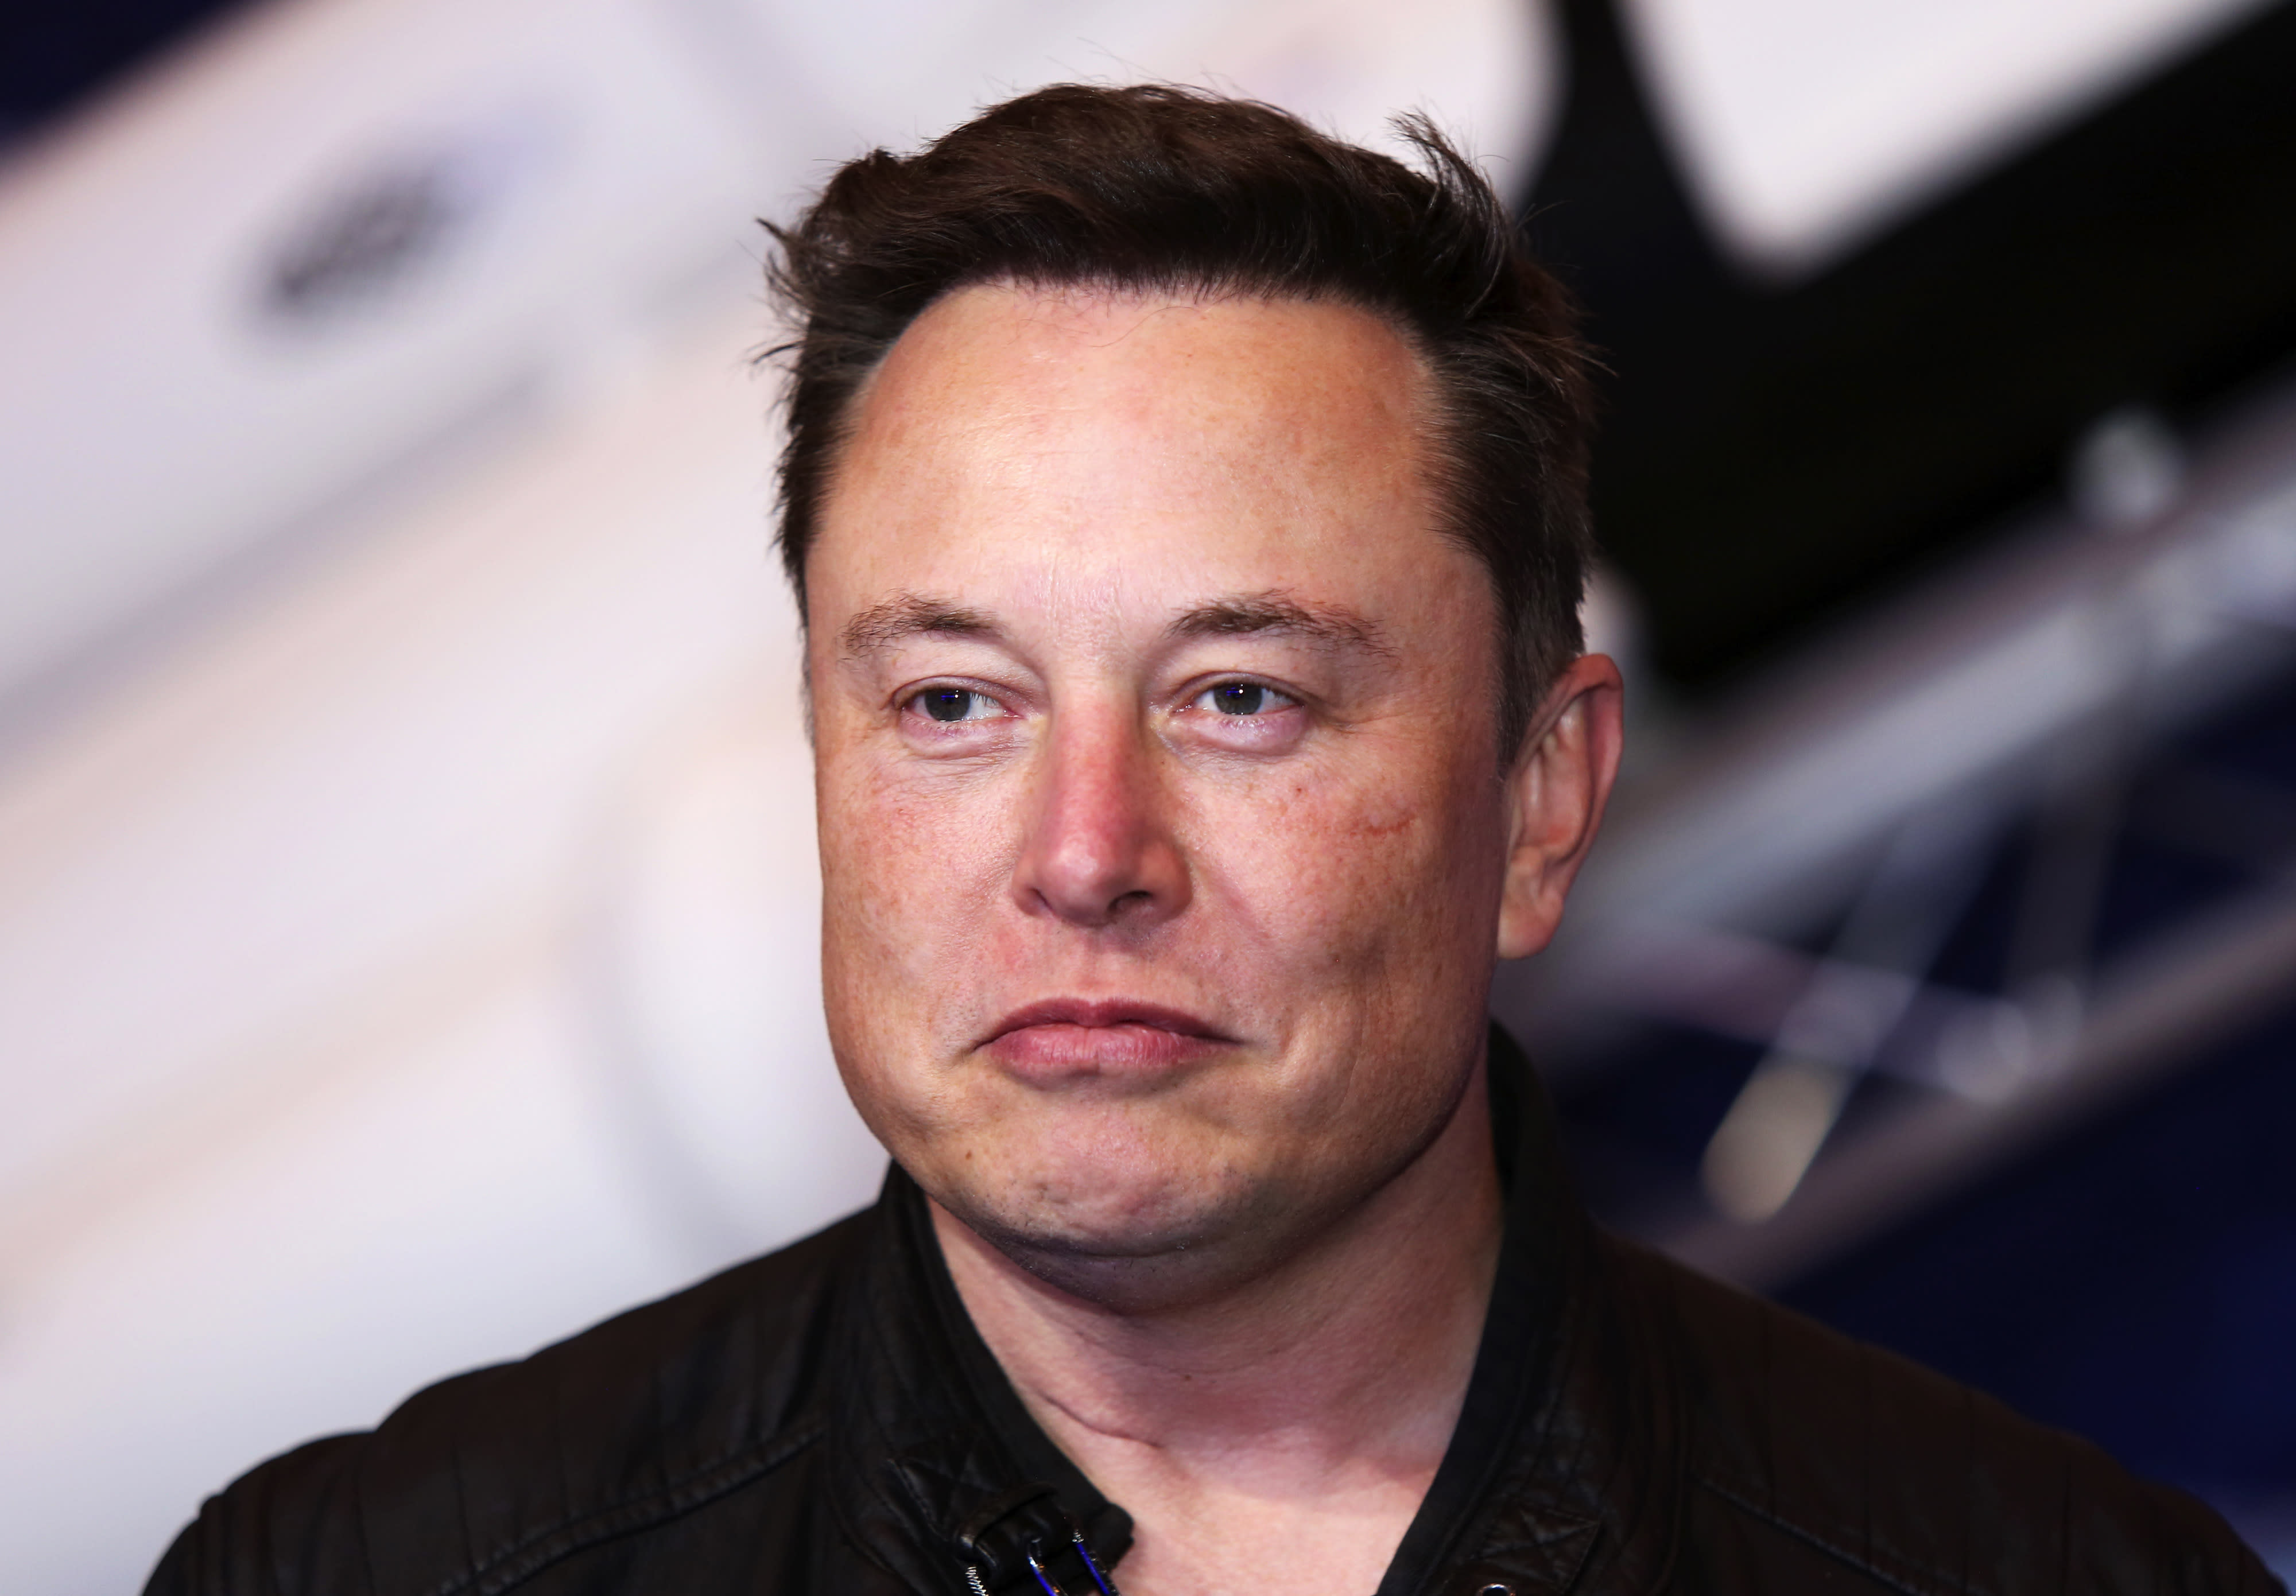 Tesla caused two-thirds of my personal, professional pain